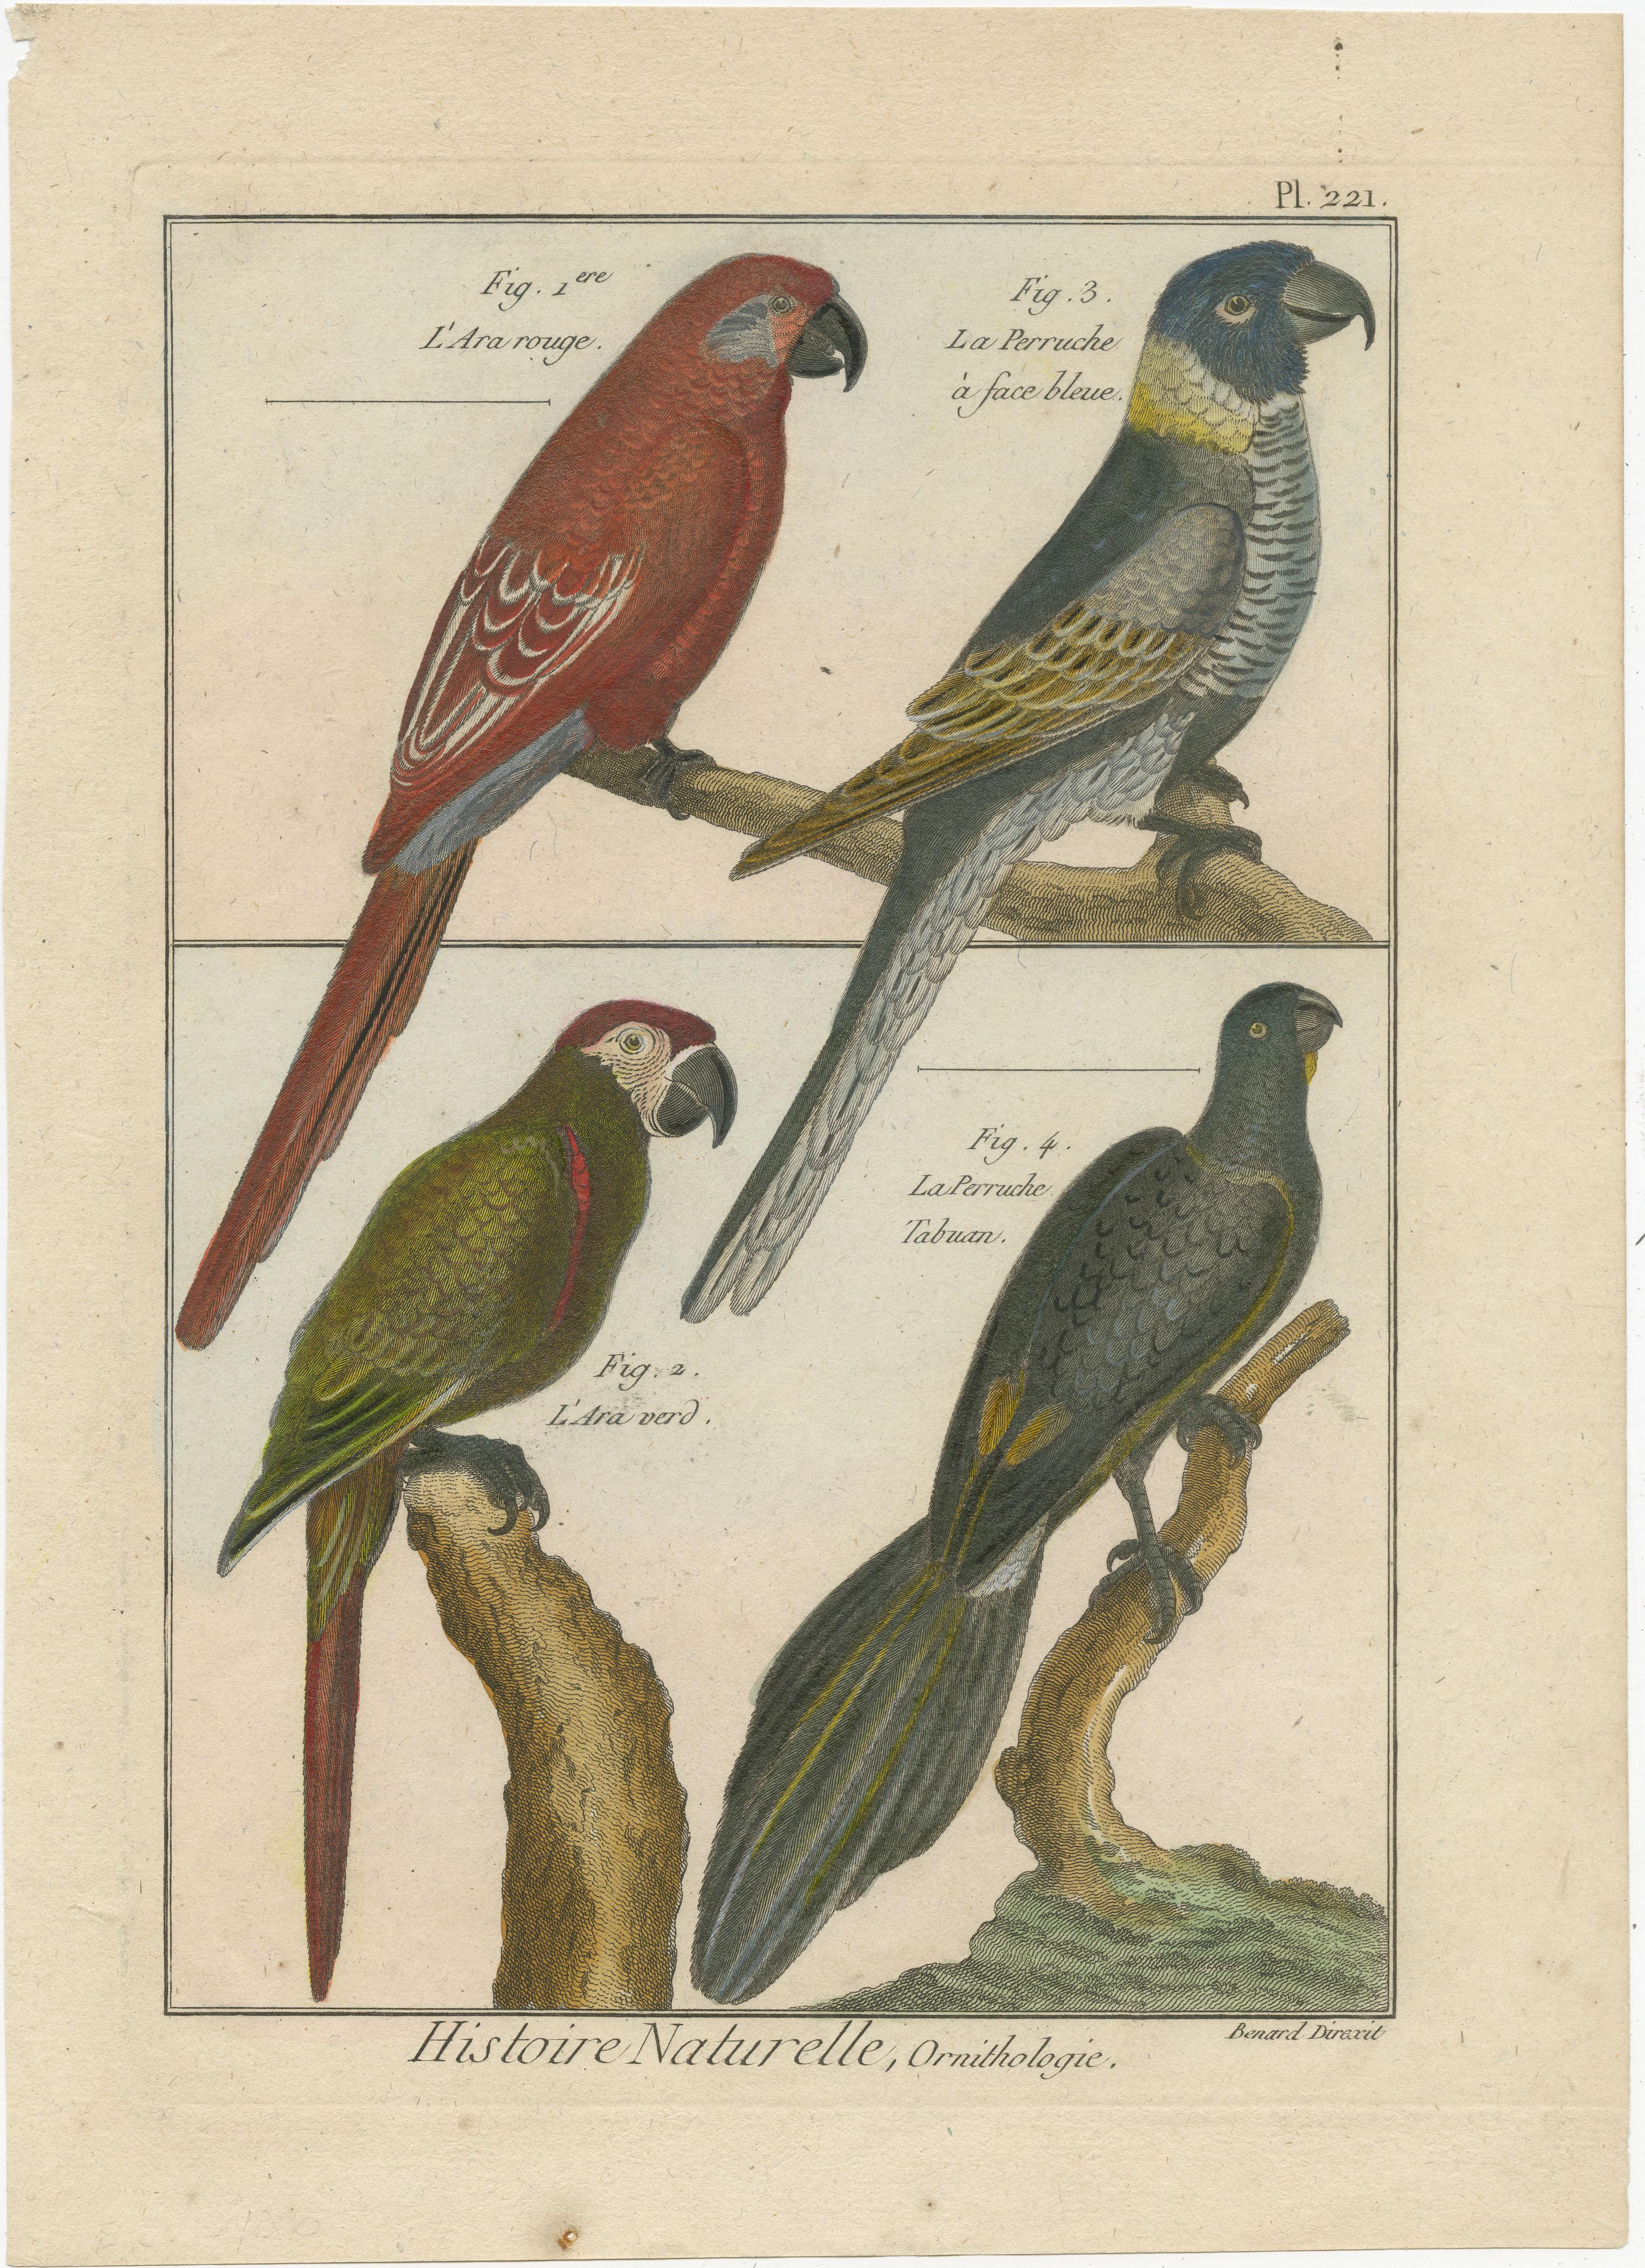 An authentic, perfect and bright, originally hand-colored, illustration of 2 Parrots and 2 Parakeets: L' Ara Rouge, La Perruche a face bleue, L' Ara Verd and La Perruche Tabuan. Drawn on parchment paper (copper engraving). It has a fine shining